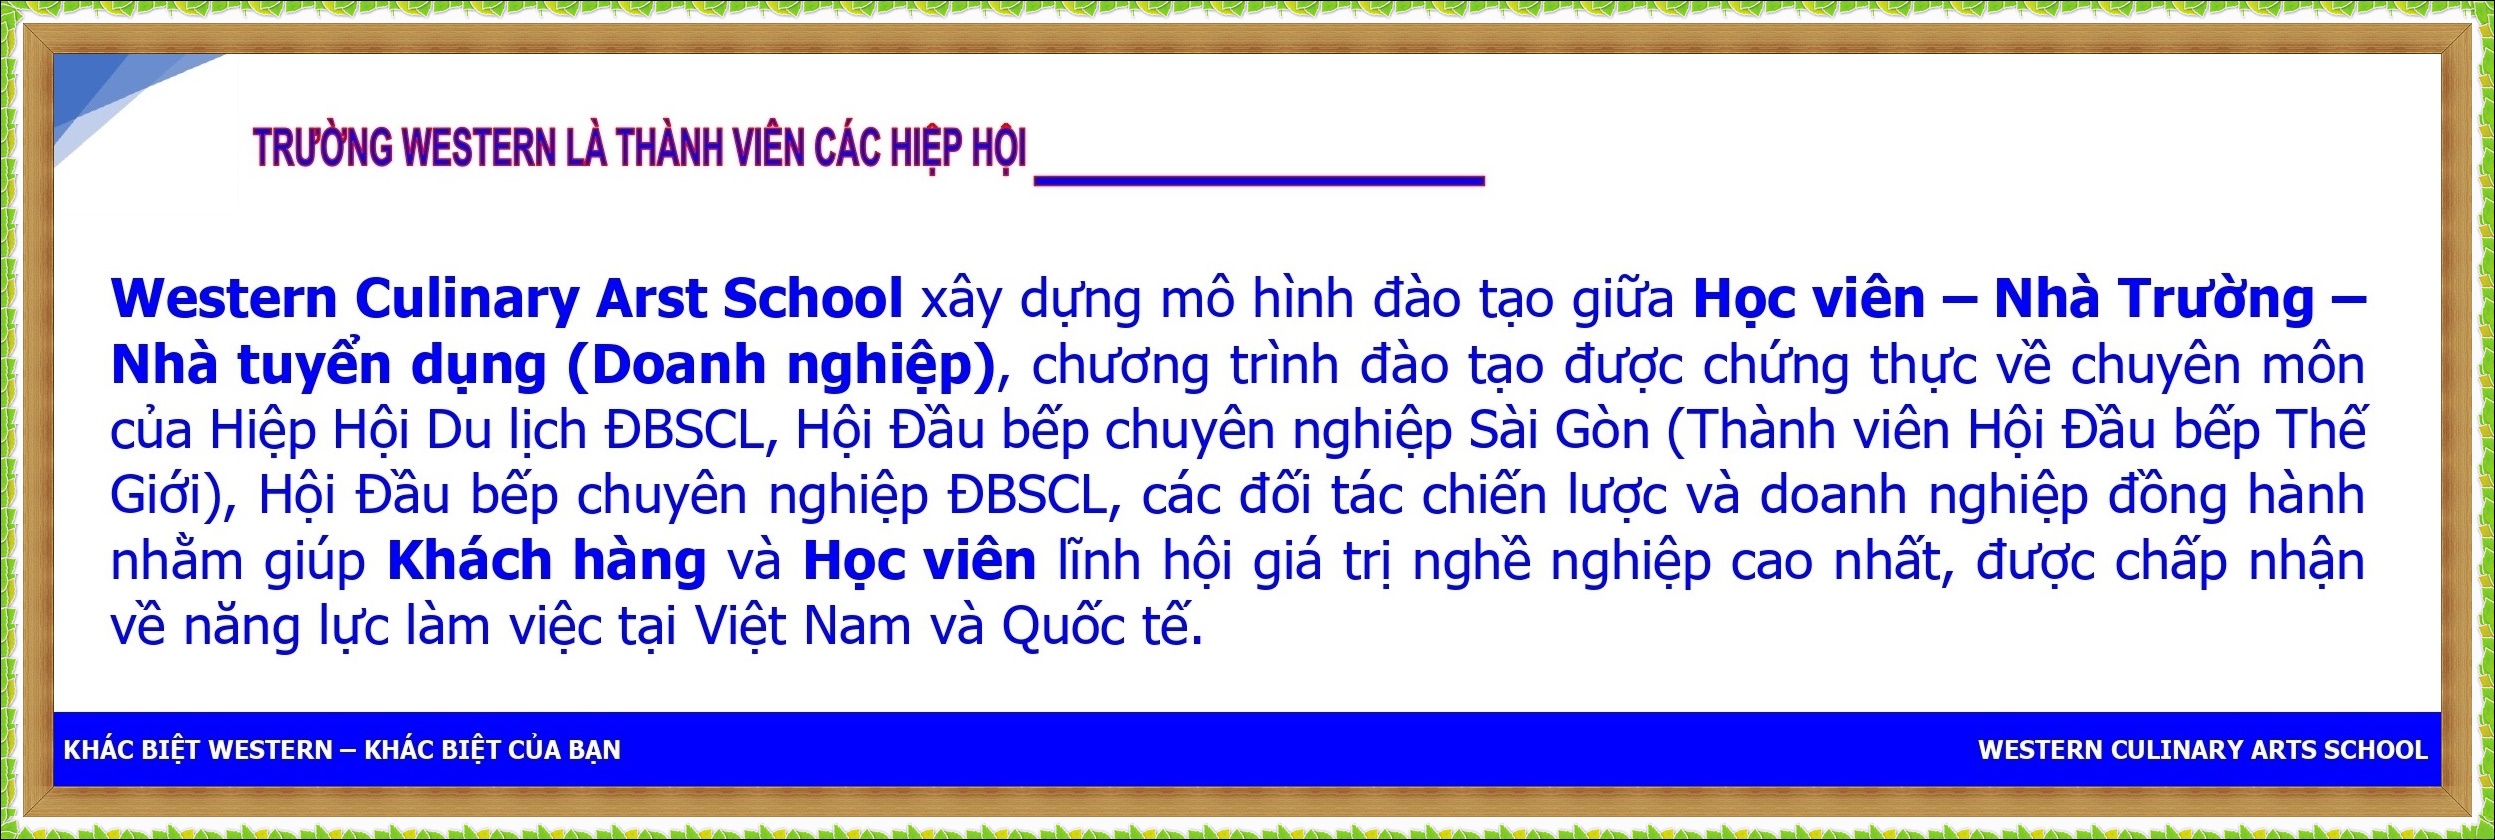 THANH VIEN CAC HIEP HOI_page-0001